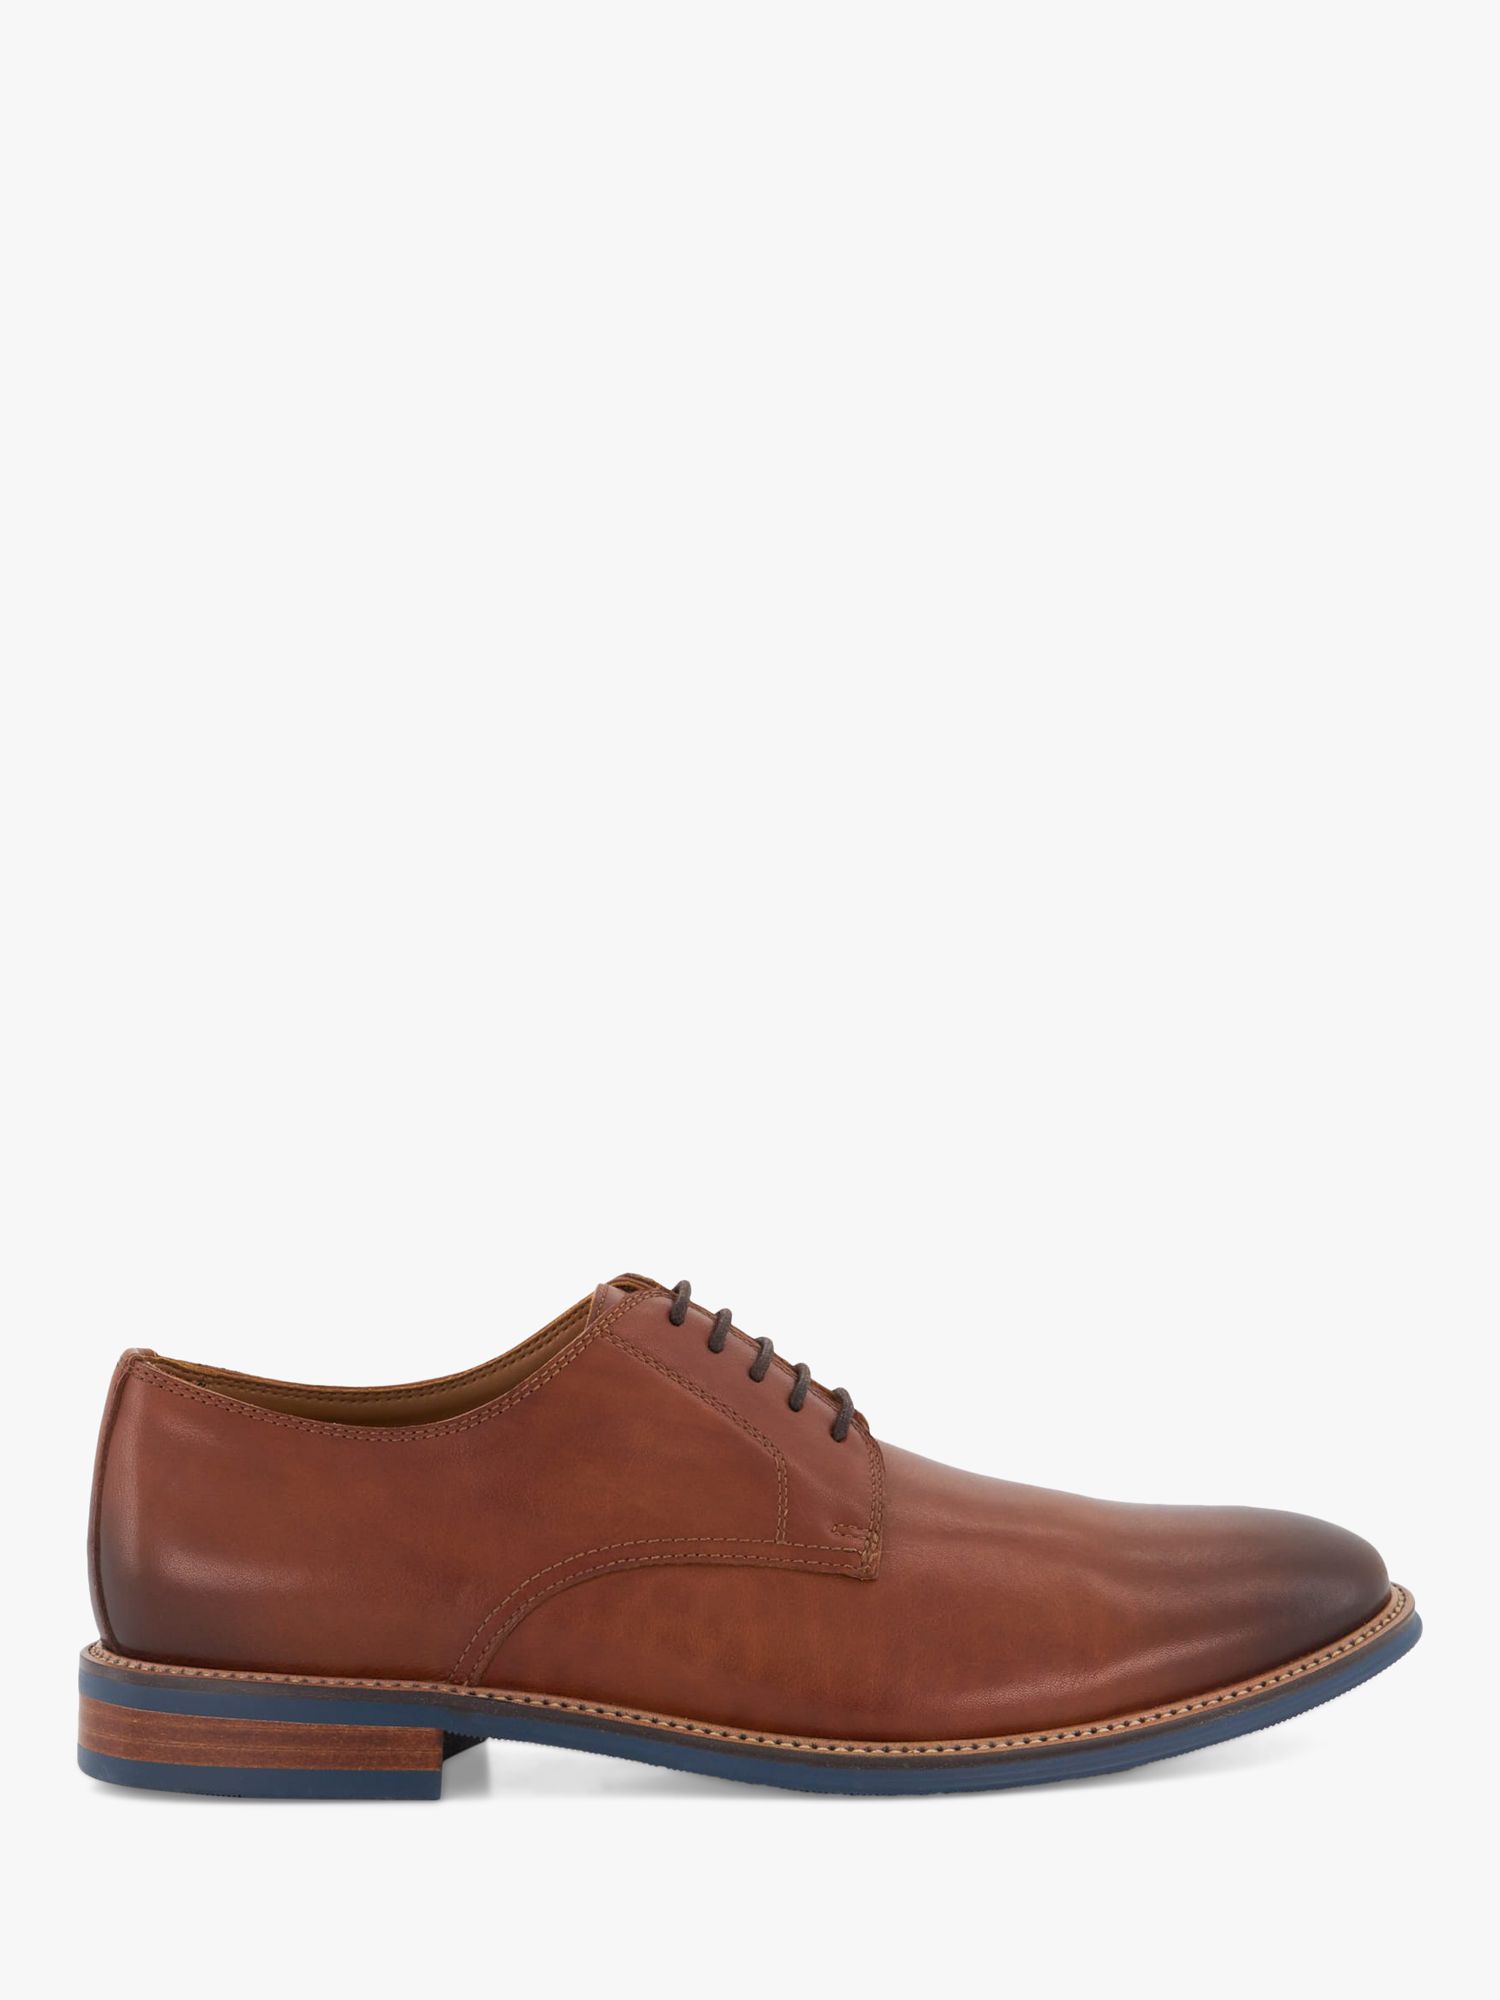 Dune Stanley Leather Derby Shoes, Tan-leather, EU40